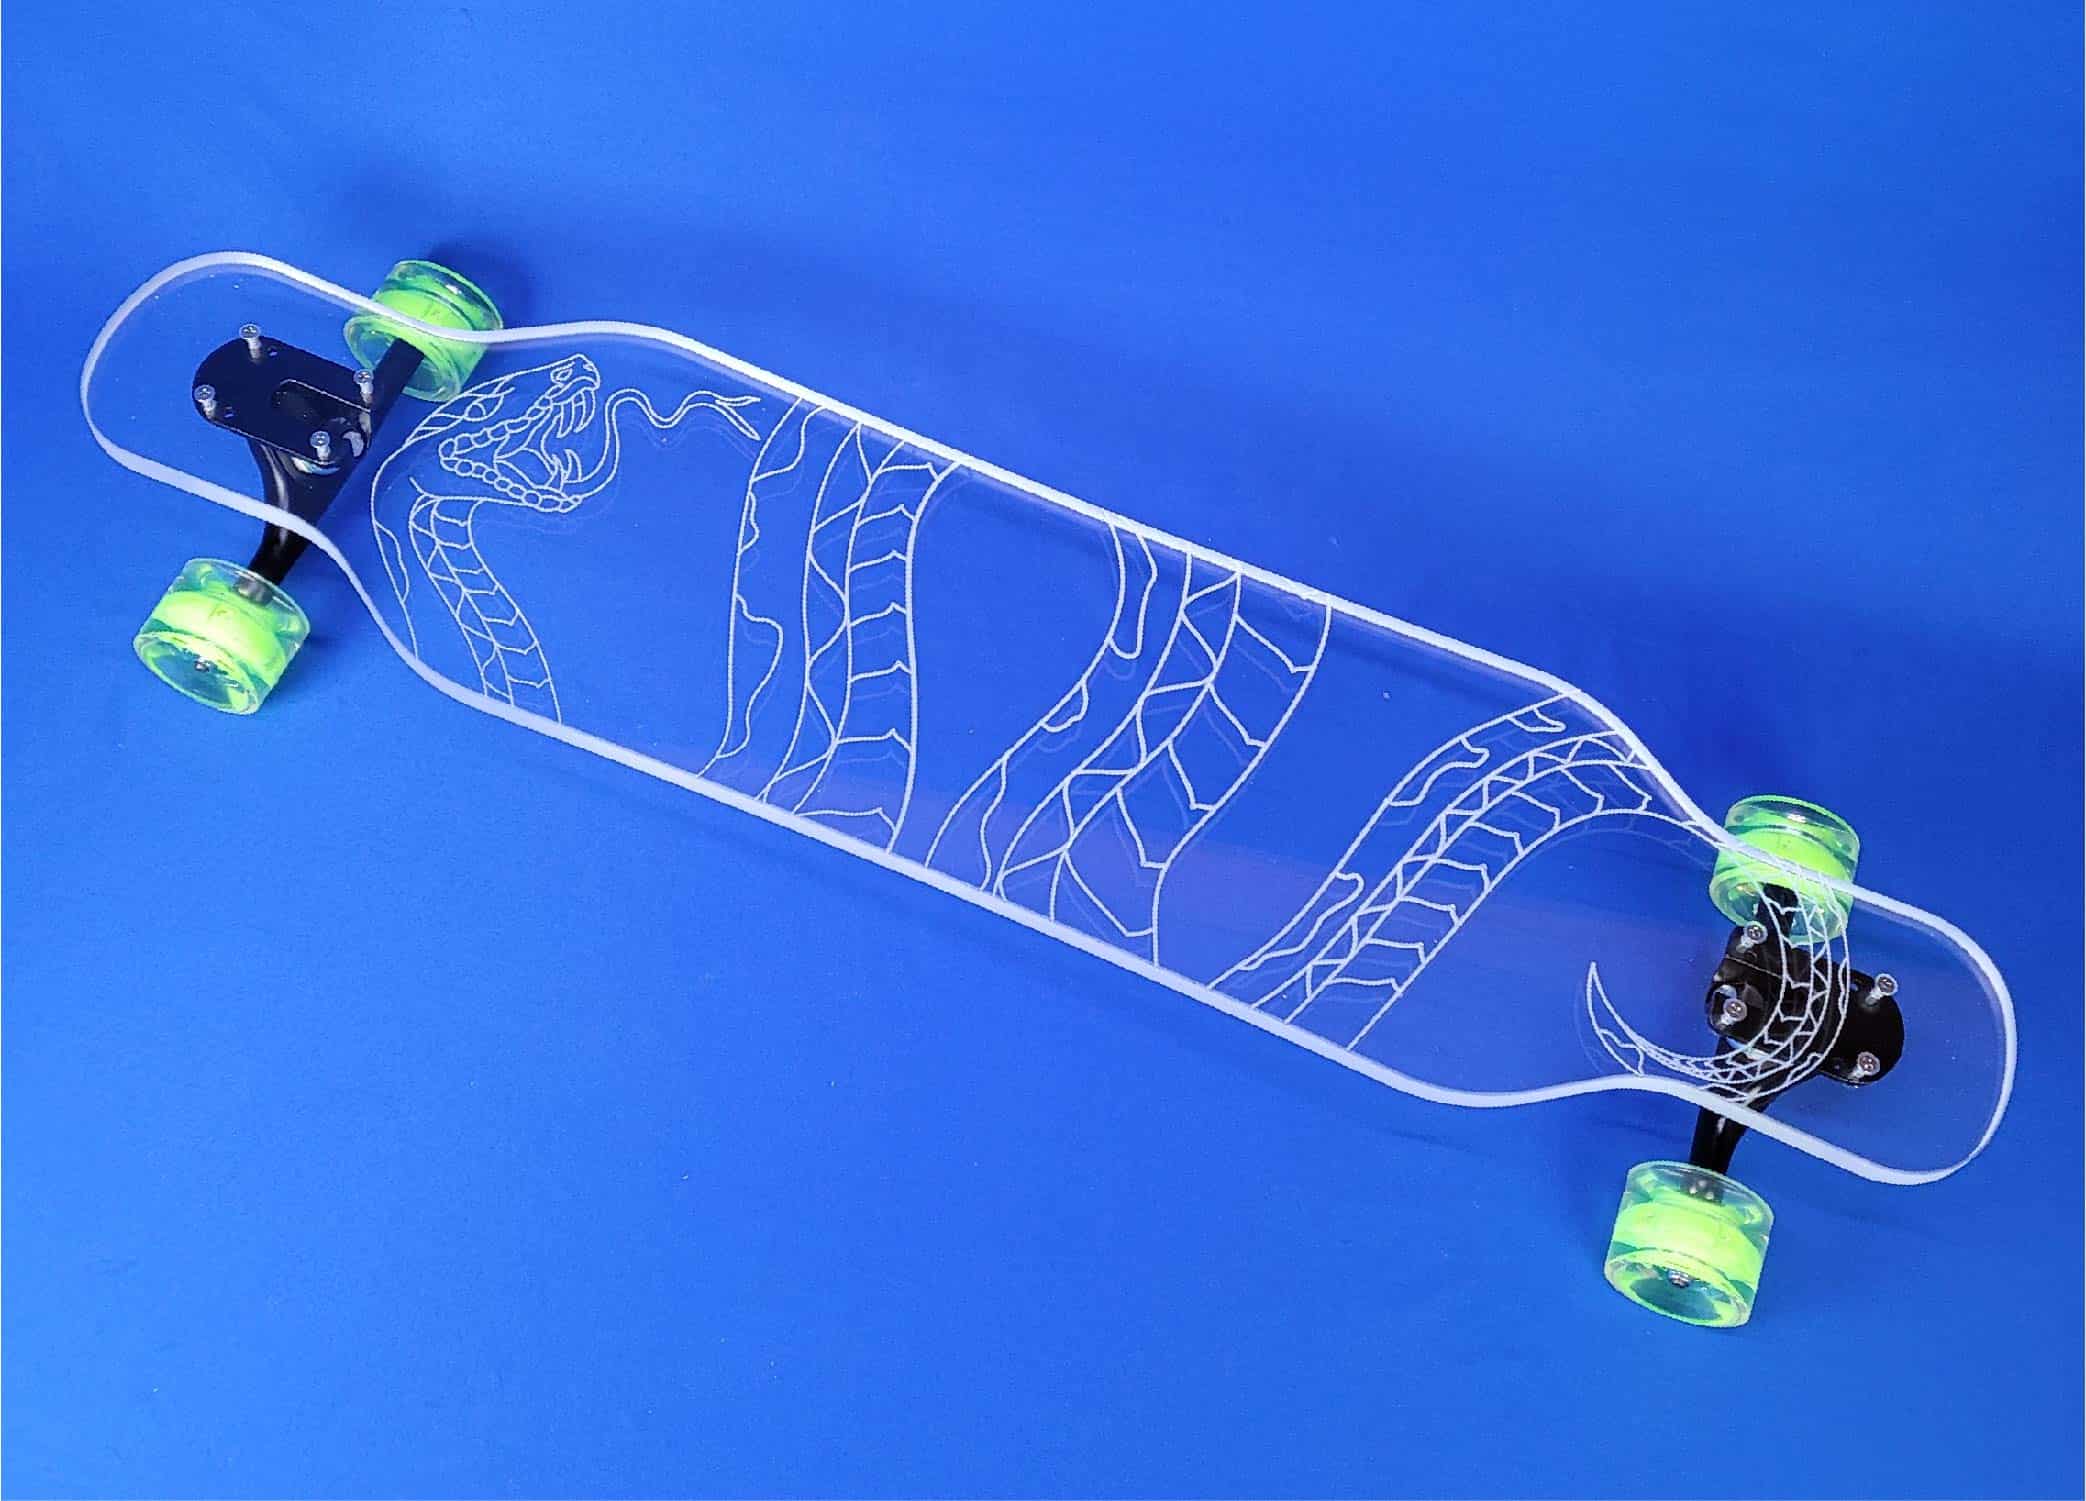 Viper Platypus Longboard- Snake wrapping around the clear Ghost longboard.